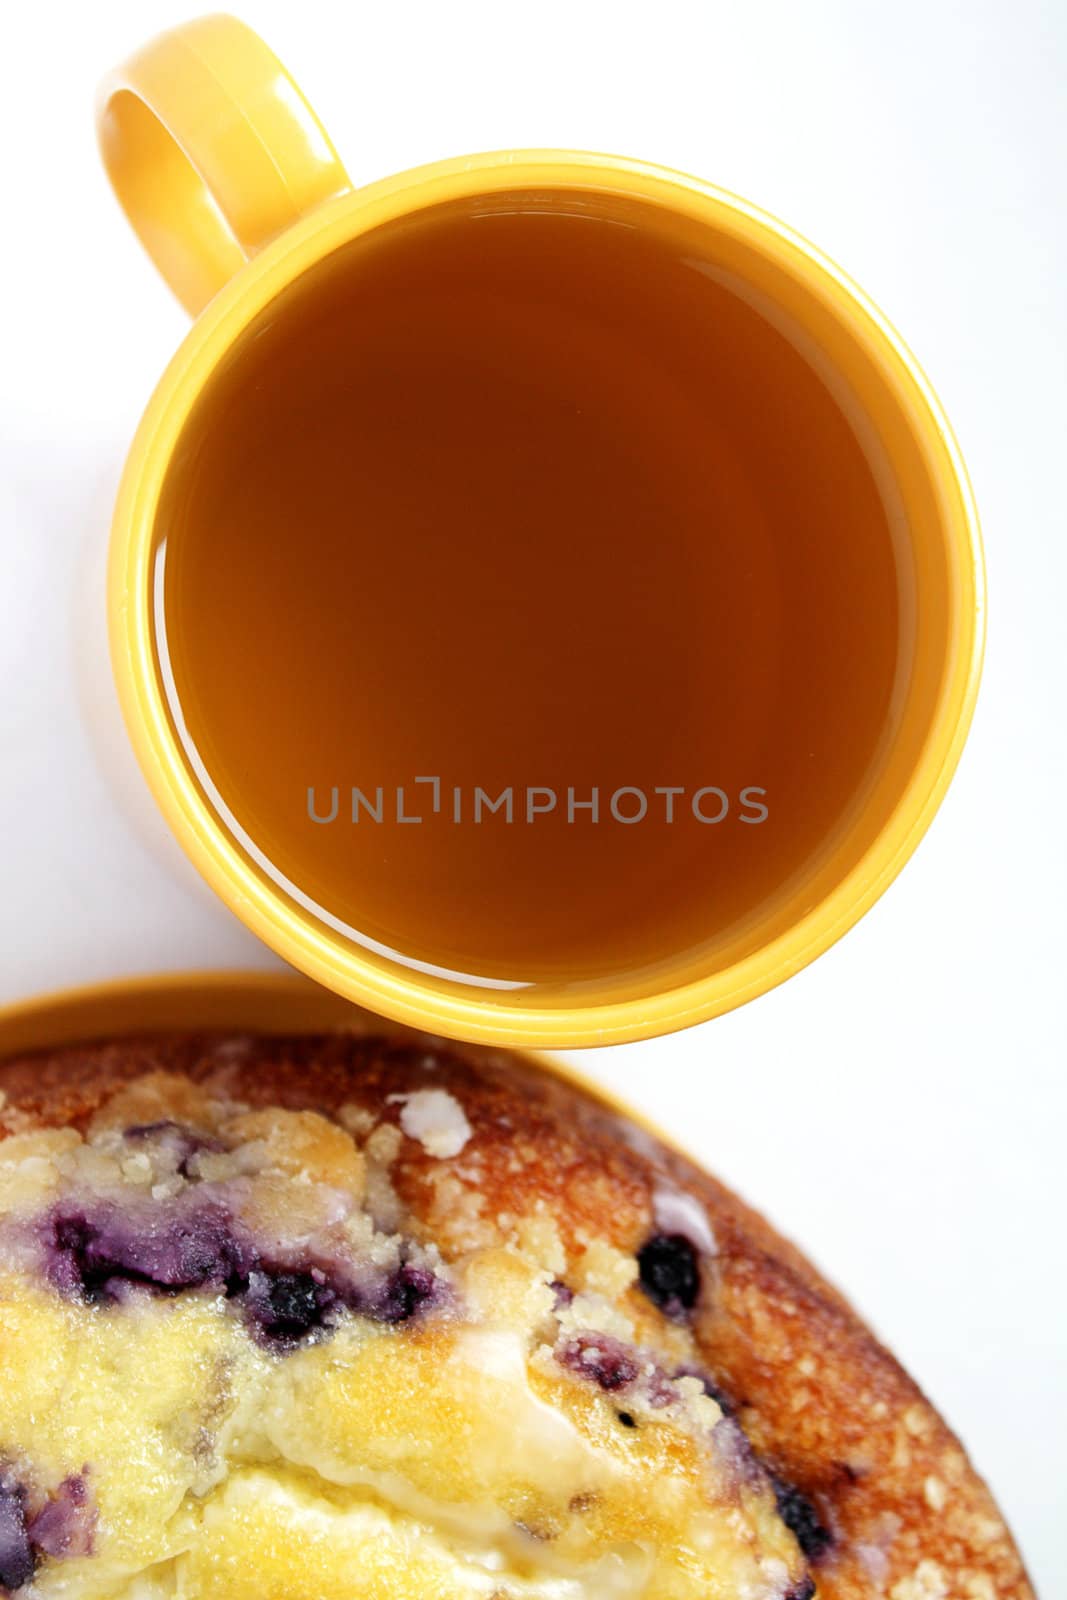 Blueberry cake and a cup of tea by pulen